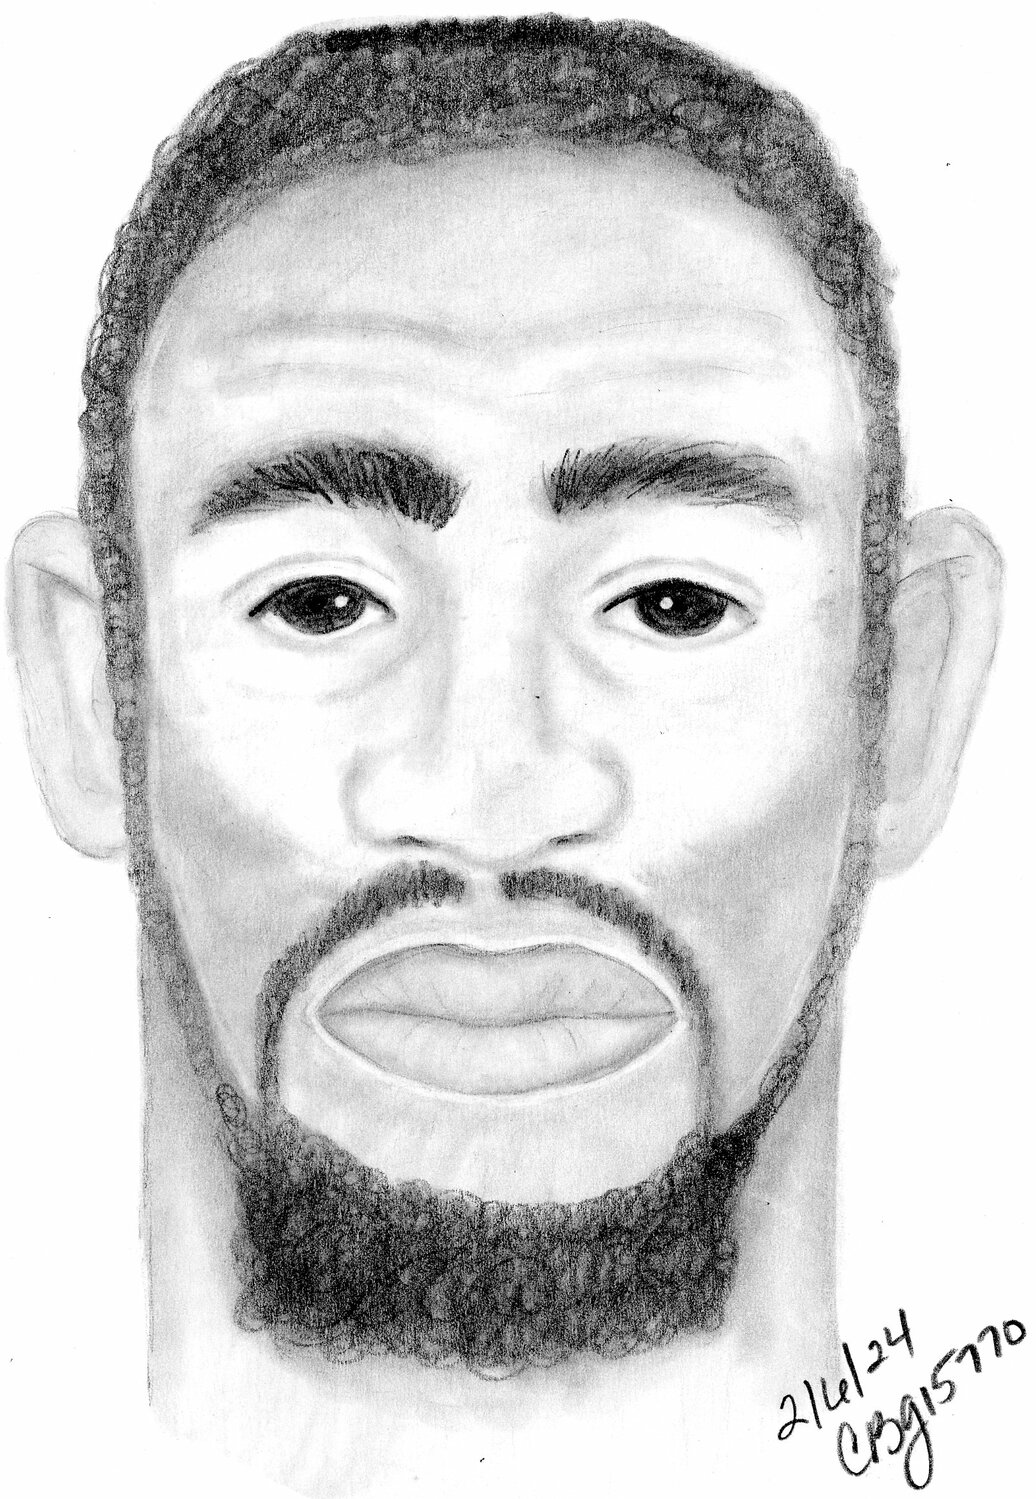 The Mesa Police Department on Tuesday released this 
composite sketch of the suspect in a recent attempted sexual assault.